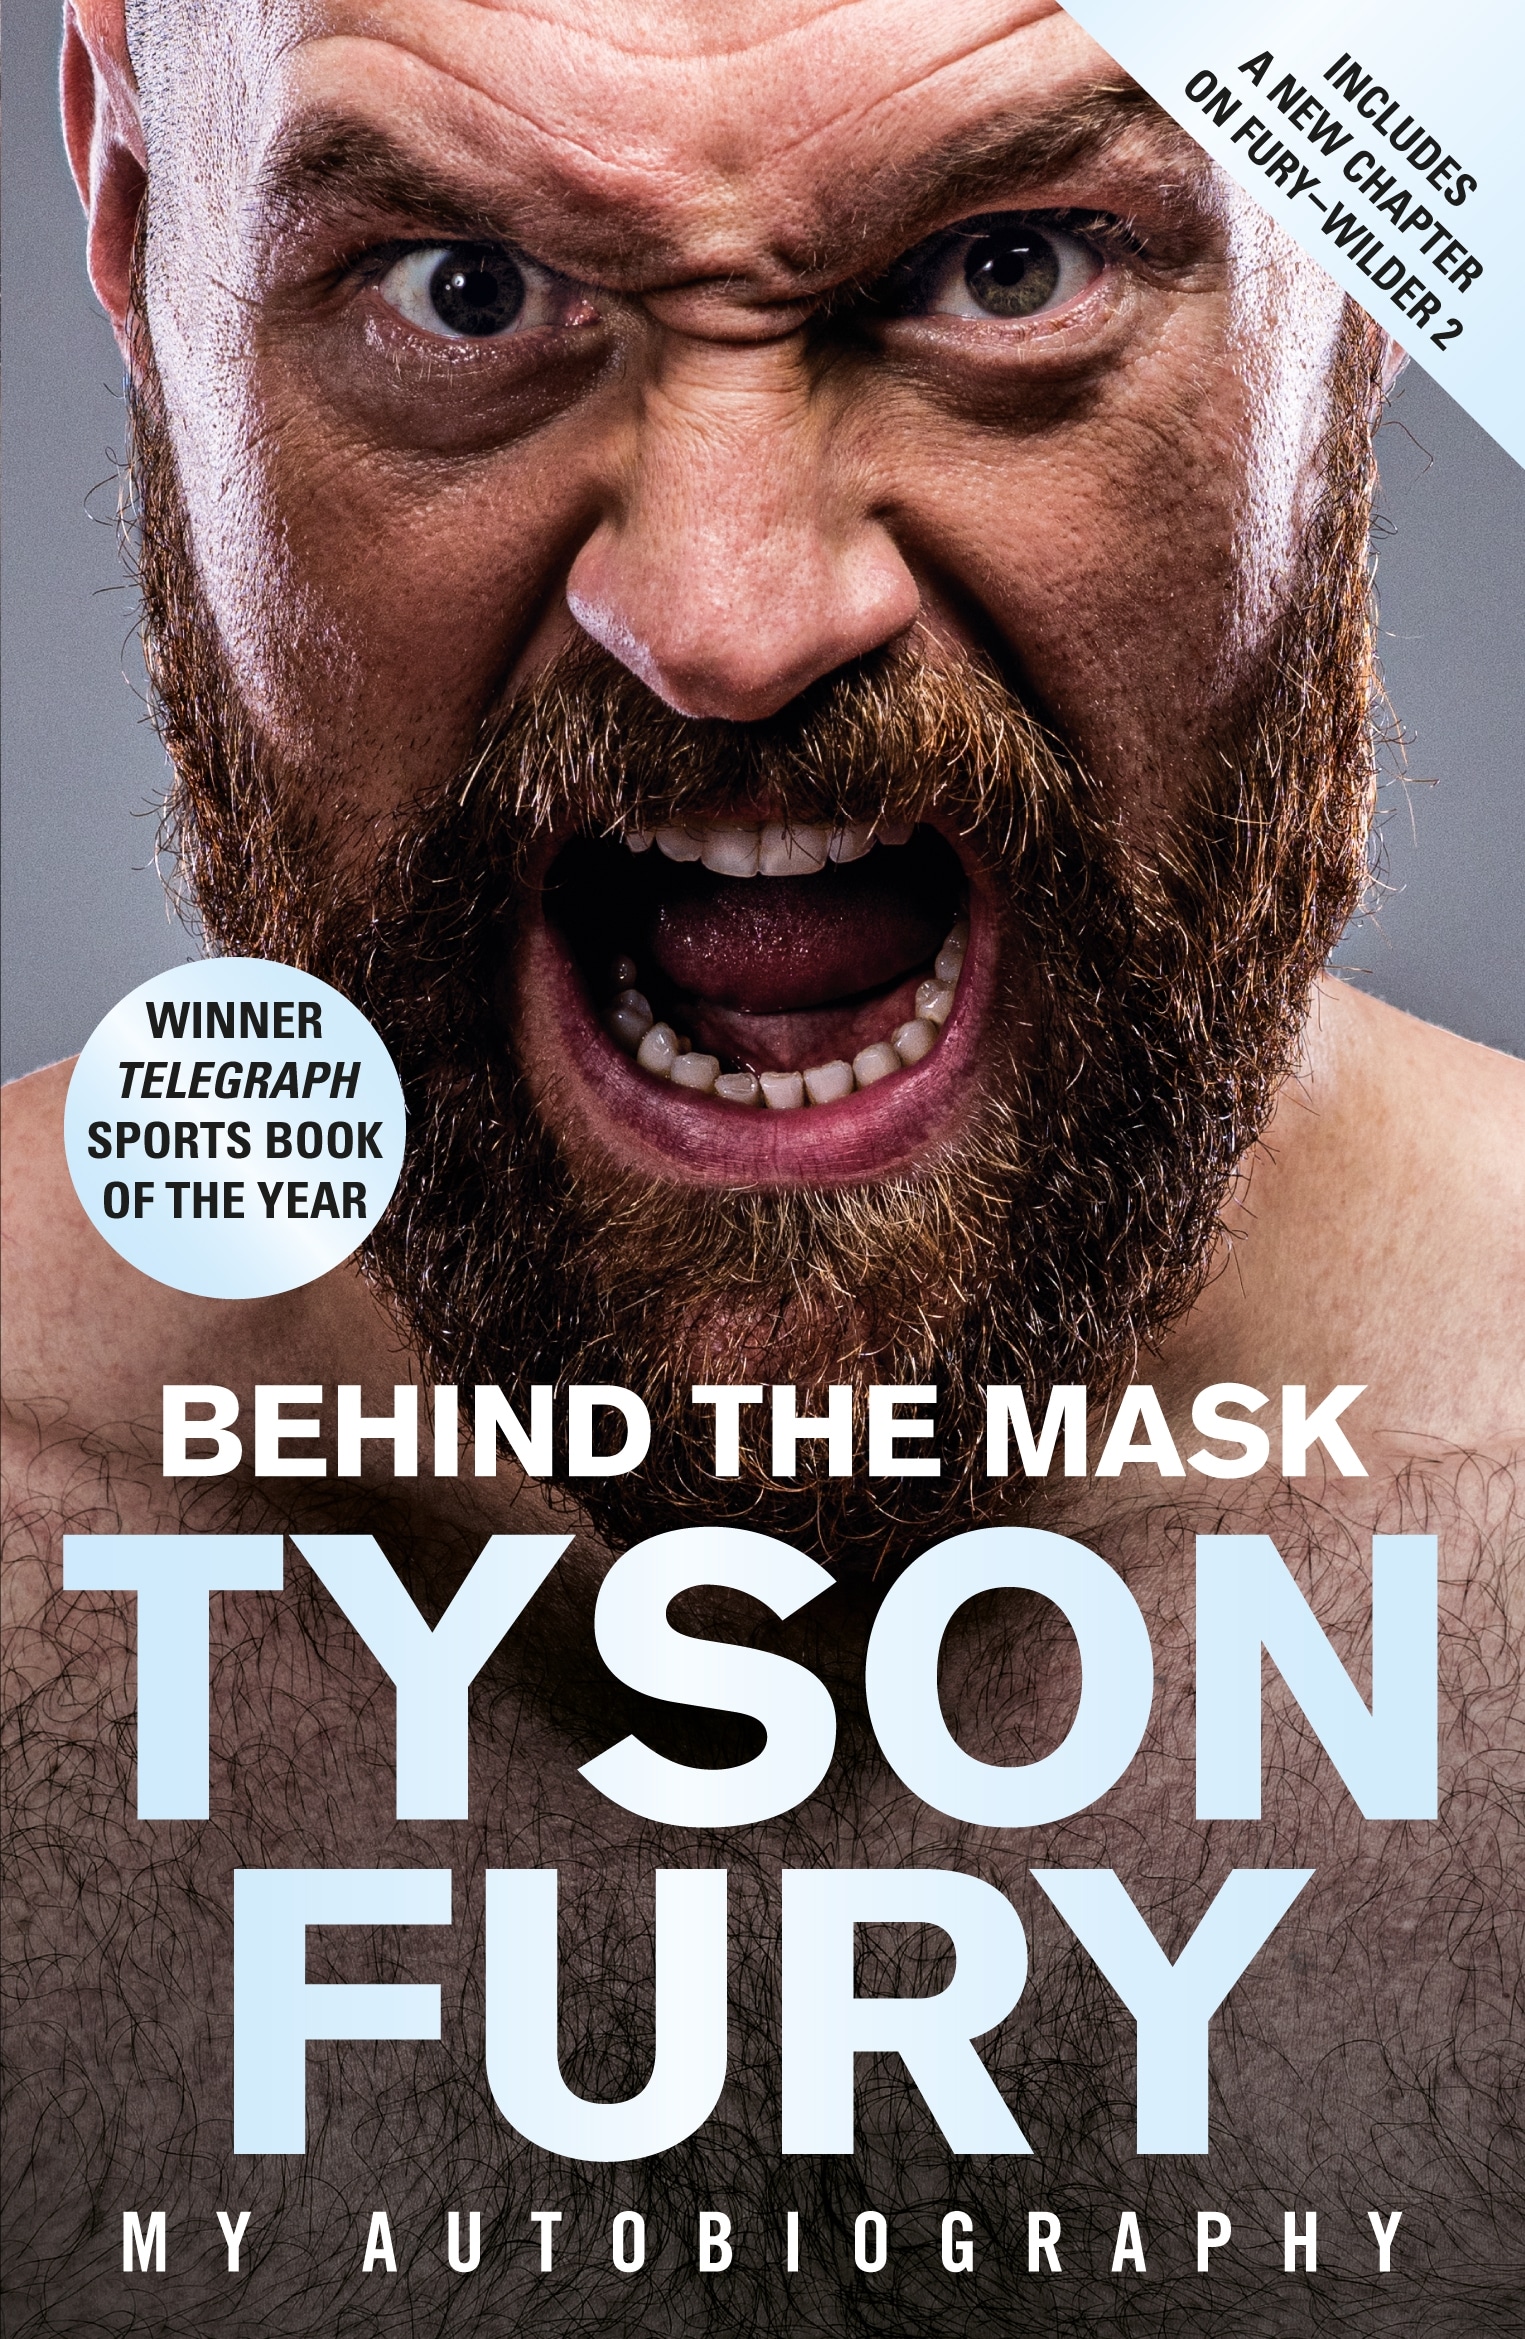 Book “Behind the Mask” by Tyson Fury — January 21, 2021